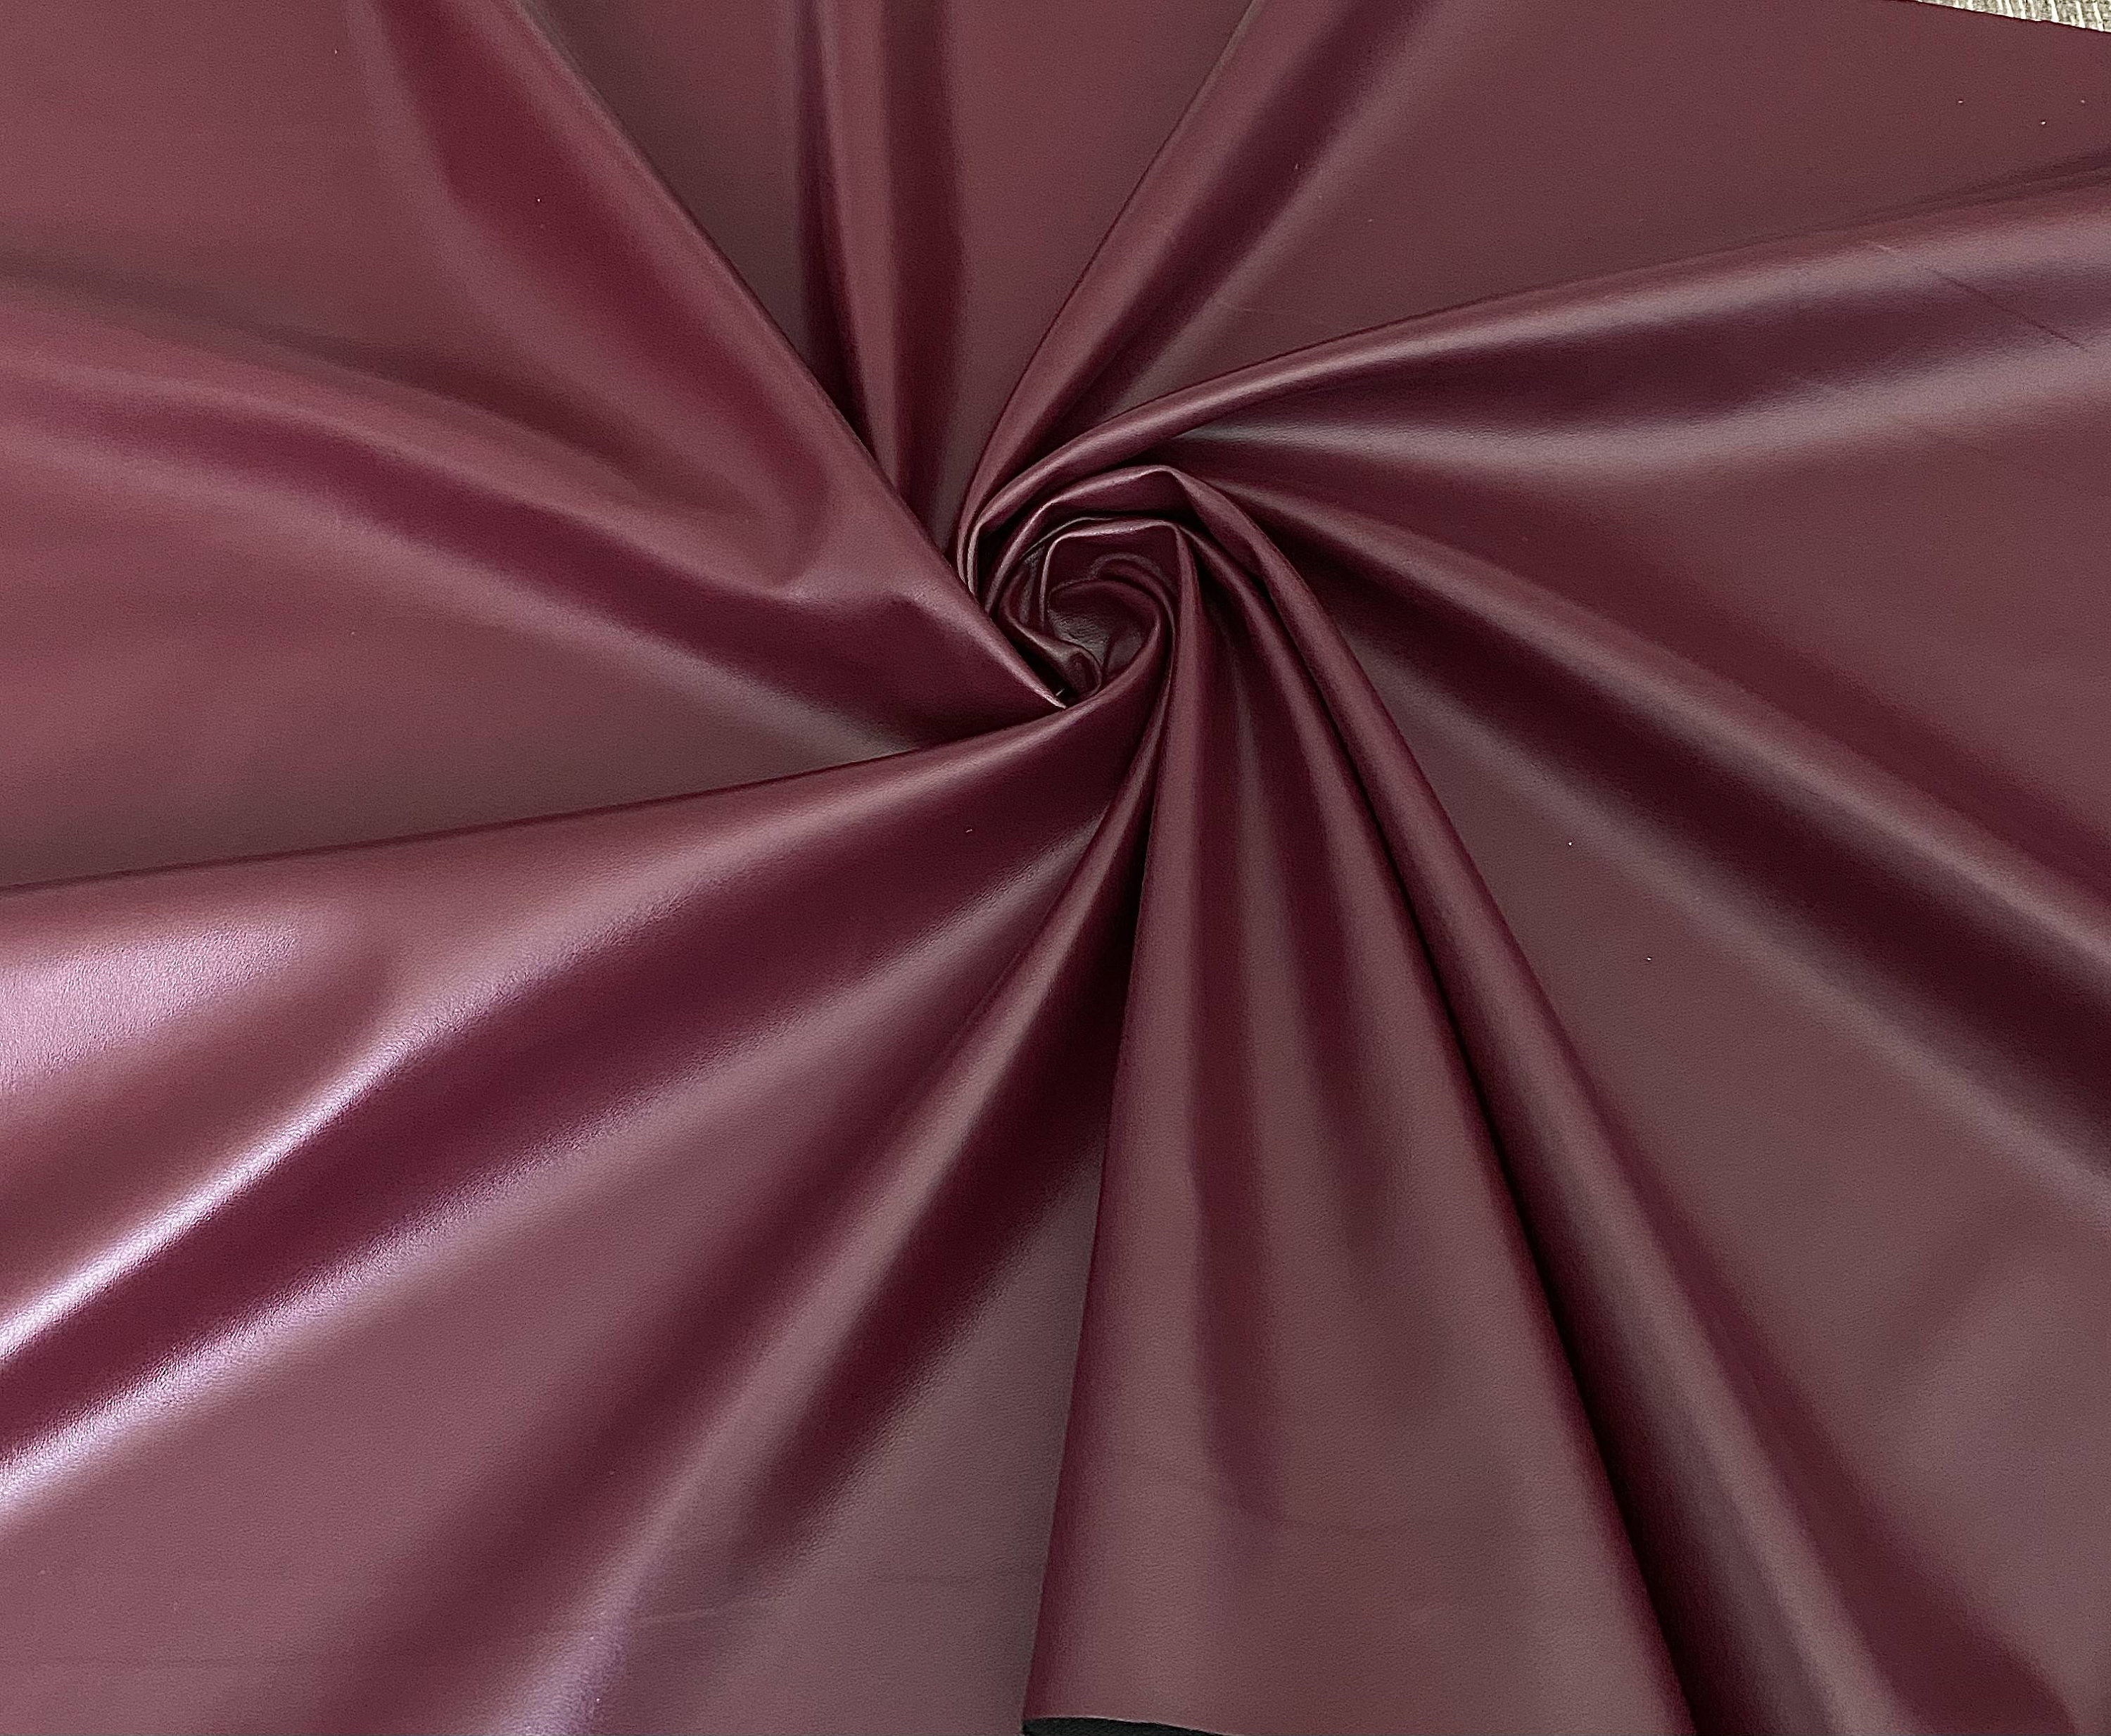 5/10/15 Yards Brown Faux Leather Fabric Pleather Upholstery Marine Vinyl  Fabric